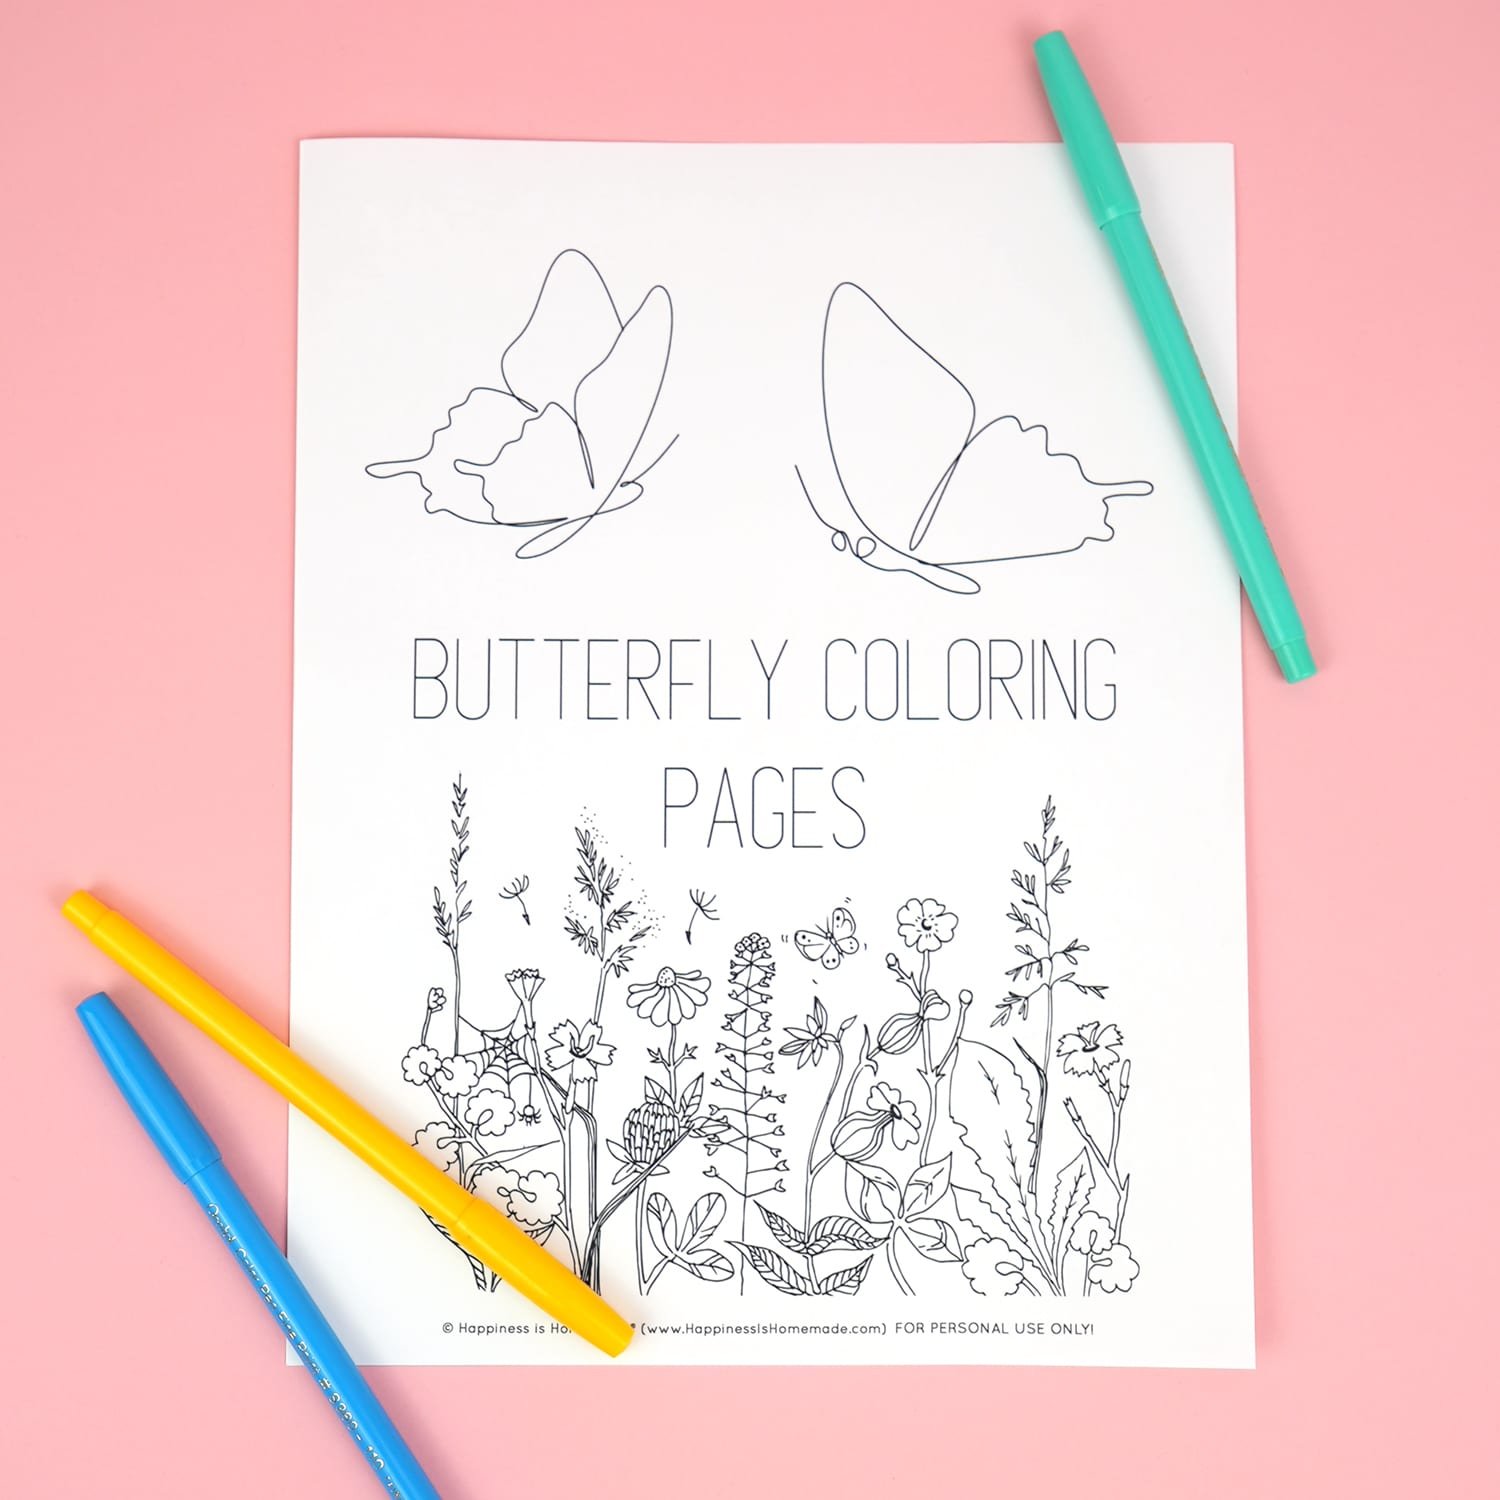 Free coloring page featuring 'Butterfly Coloring Pages' text and decorated with flowers and butterflies on a pink background with markers